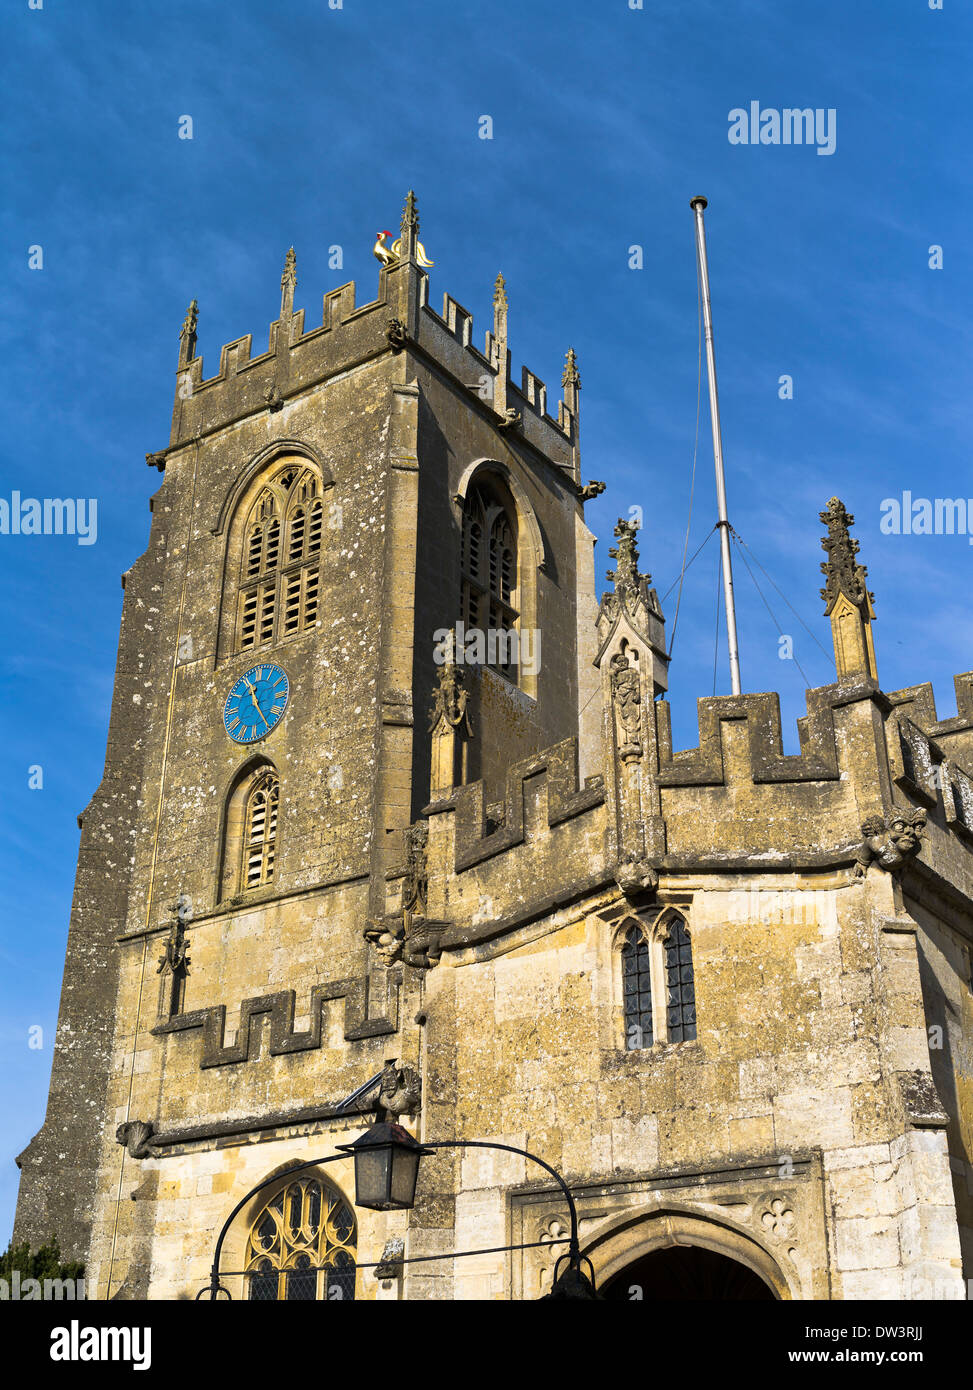 dh St Peters Church cotswolds UK WINCHCOMBE GLOUCESTERSHIRE Cotswold Inglese chiesa parrocchiale torre orologio campanile con gargoyles inghilterra medievale Foto Stock